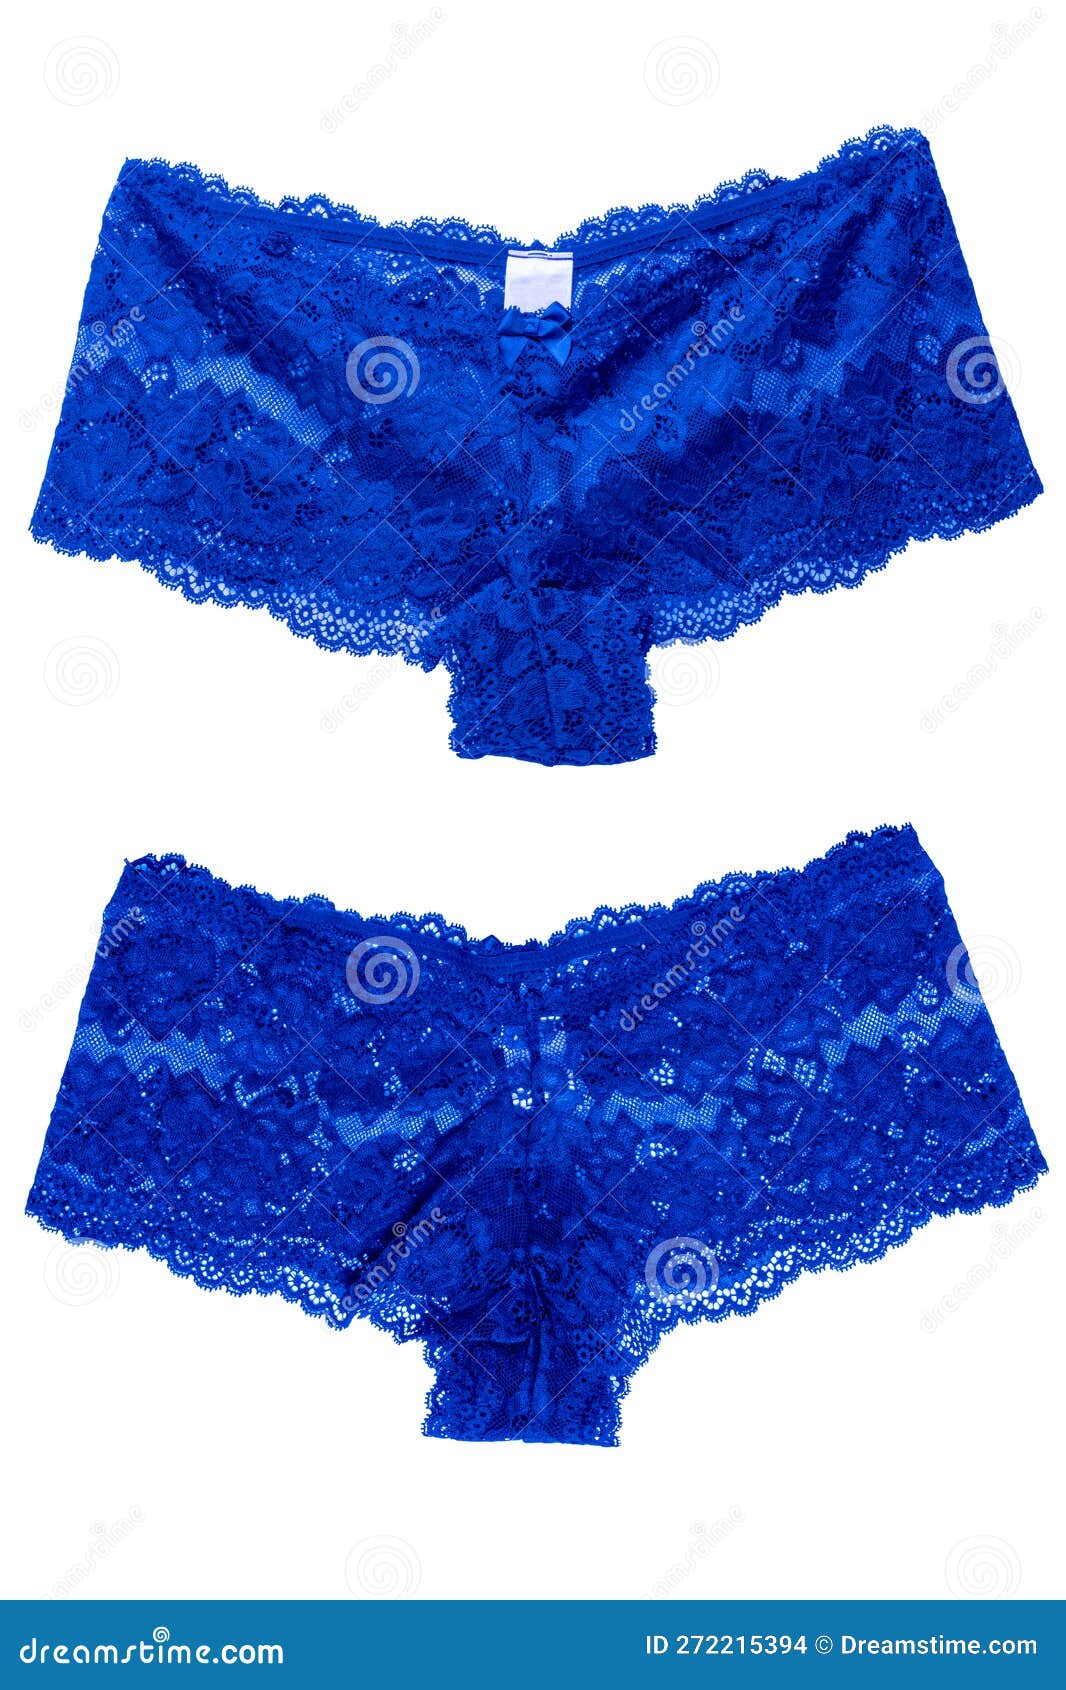 Underwear Woman Isolated. Collage Set of a Luxurious Elegant Blue Lacy  Thongs Panties in Two Views Isolated. Erotic Lace Fashion Stock Photo -  Image of underclothes, background: 272215394